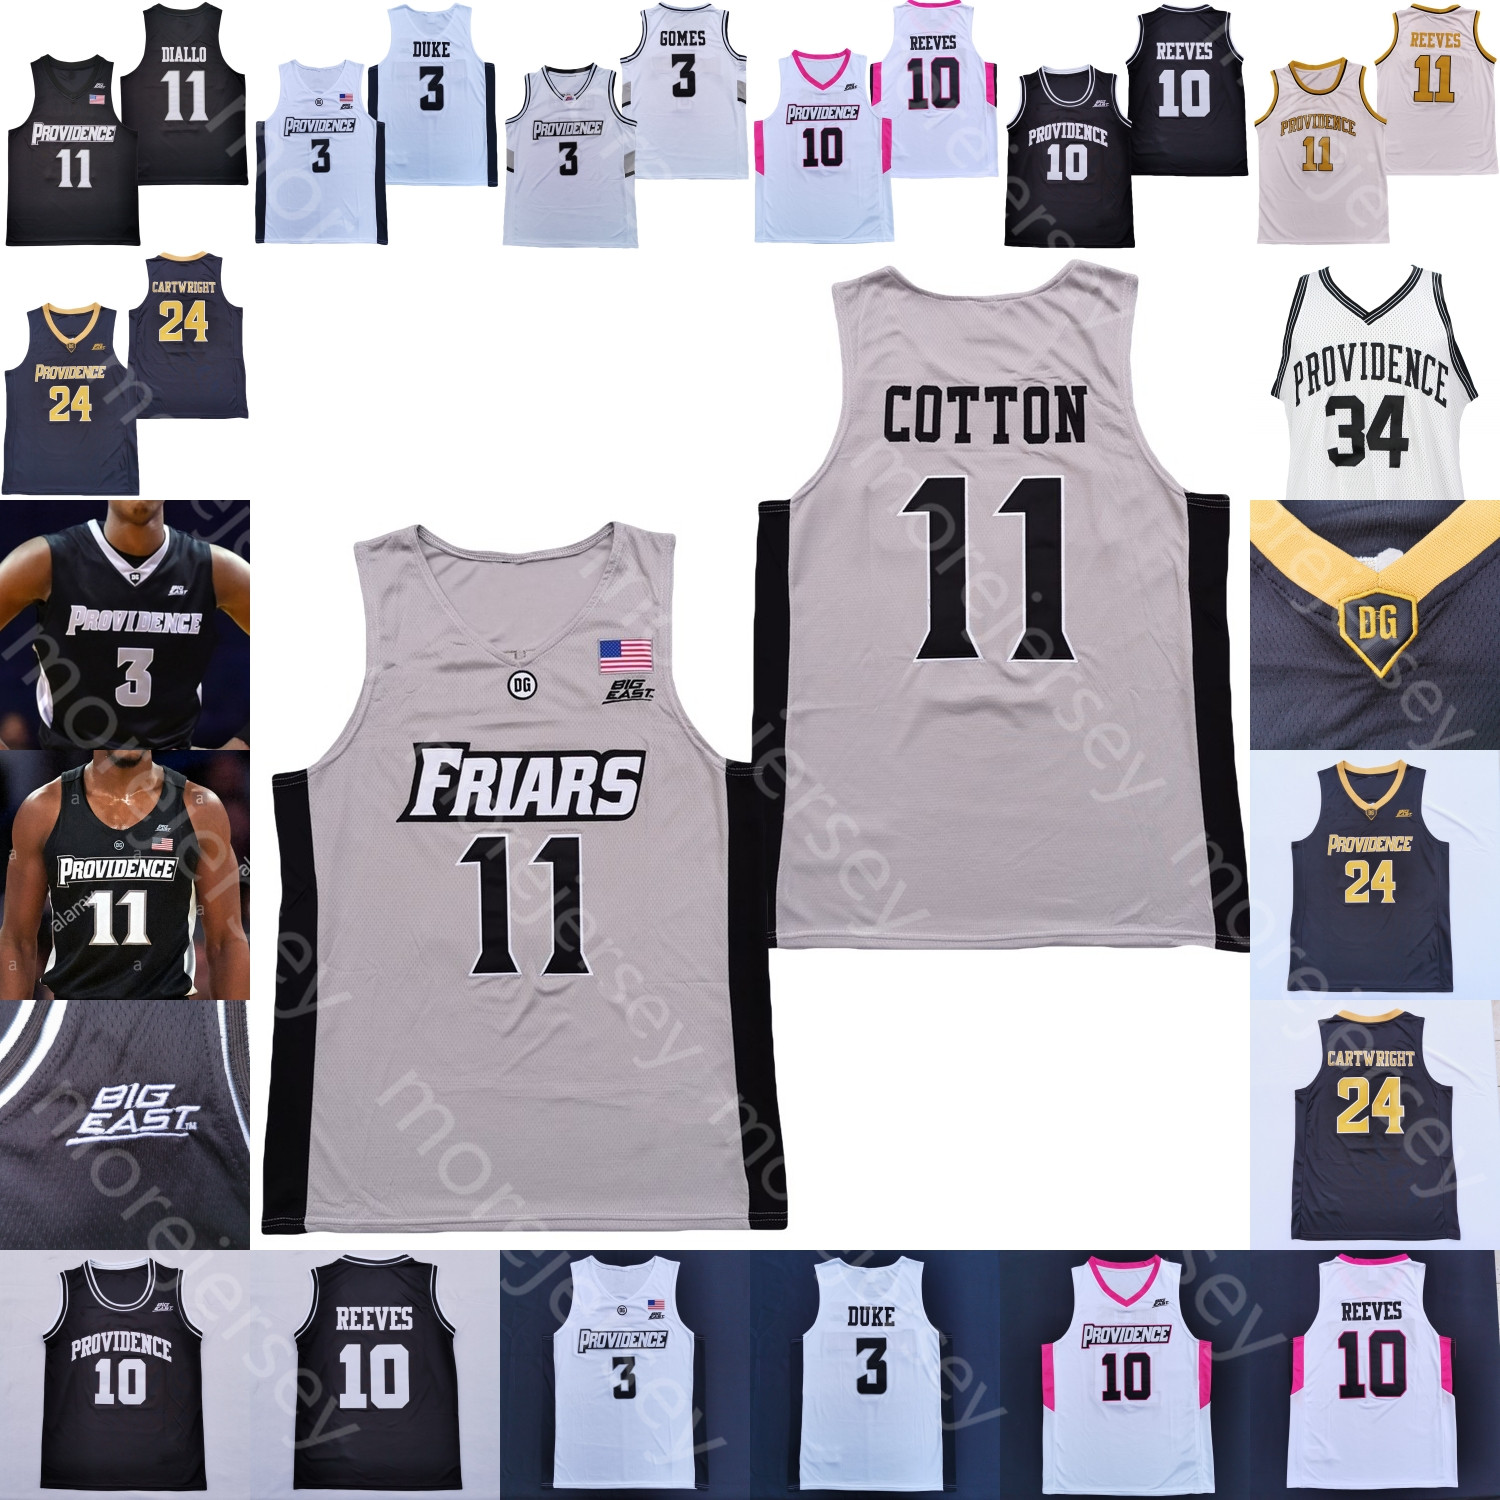 

Providence Friars Basketball Jersey NCAA College Nate Watson A.J. Reeves Brycen Goodine Alyn Breed Al Durham Noah Horchler Otis Thorpe Gomes Dunn Lenny Wilkens COTTON, White pink